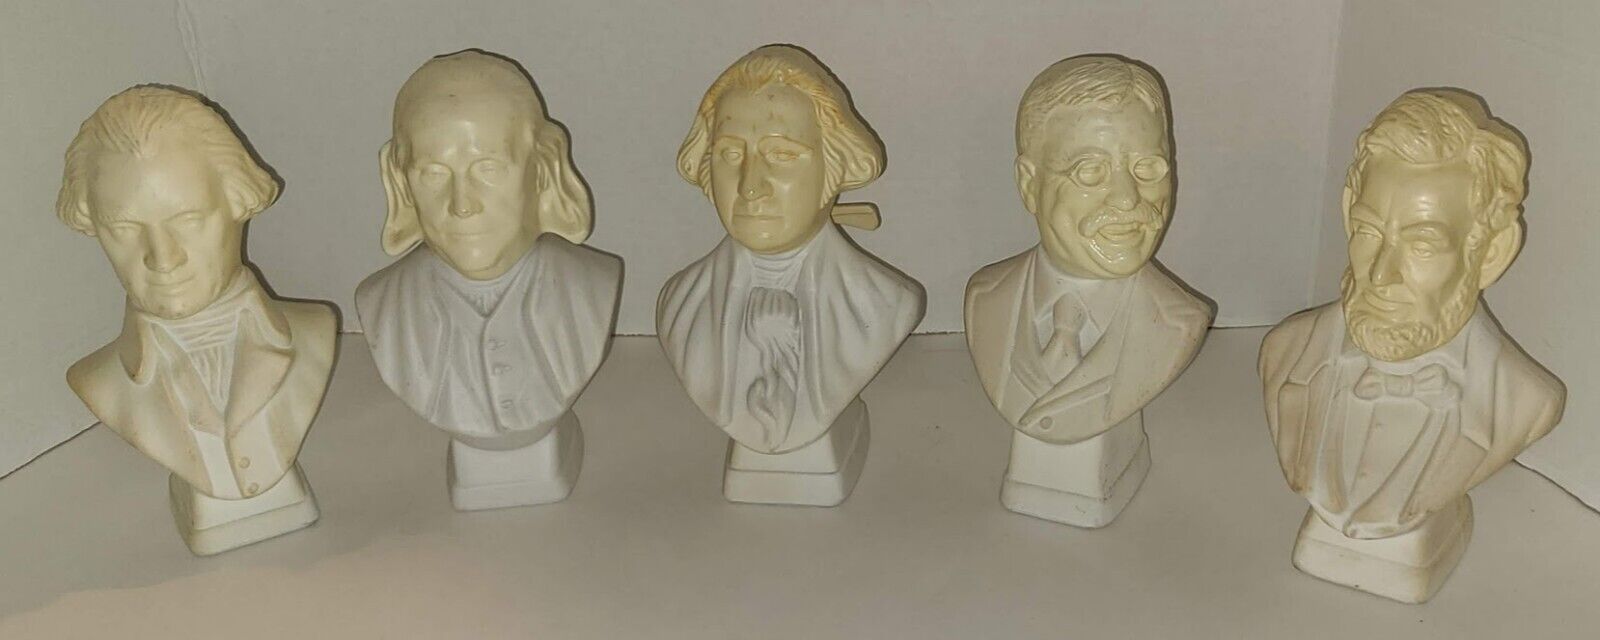 Vintage Avon Lot of 5 Presidents Busts After Shave Colognes Collectibles Figures